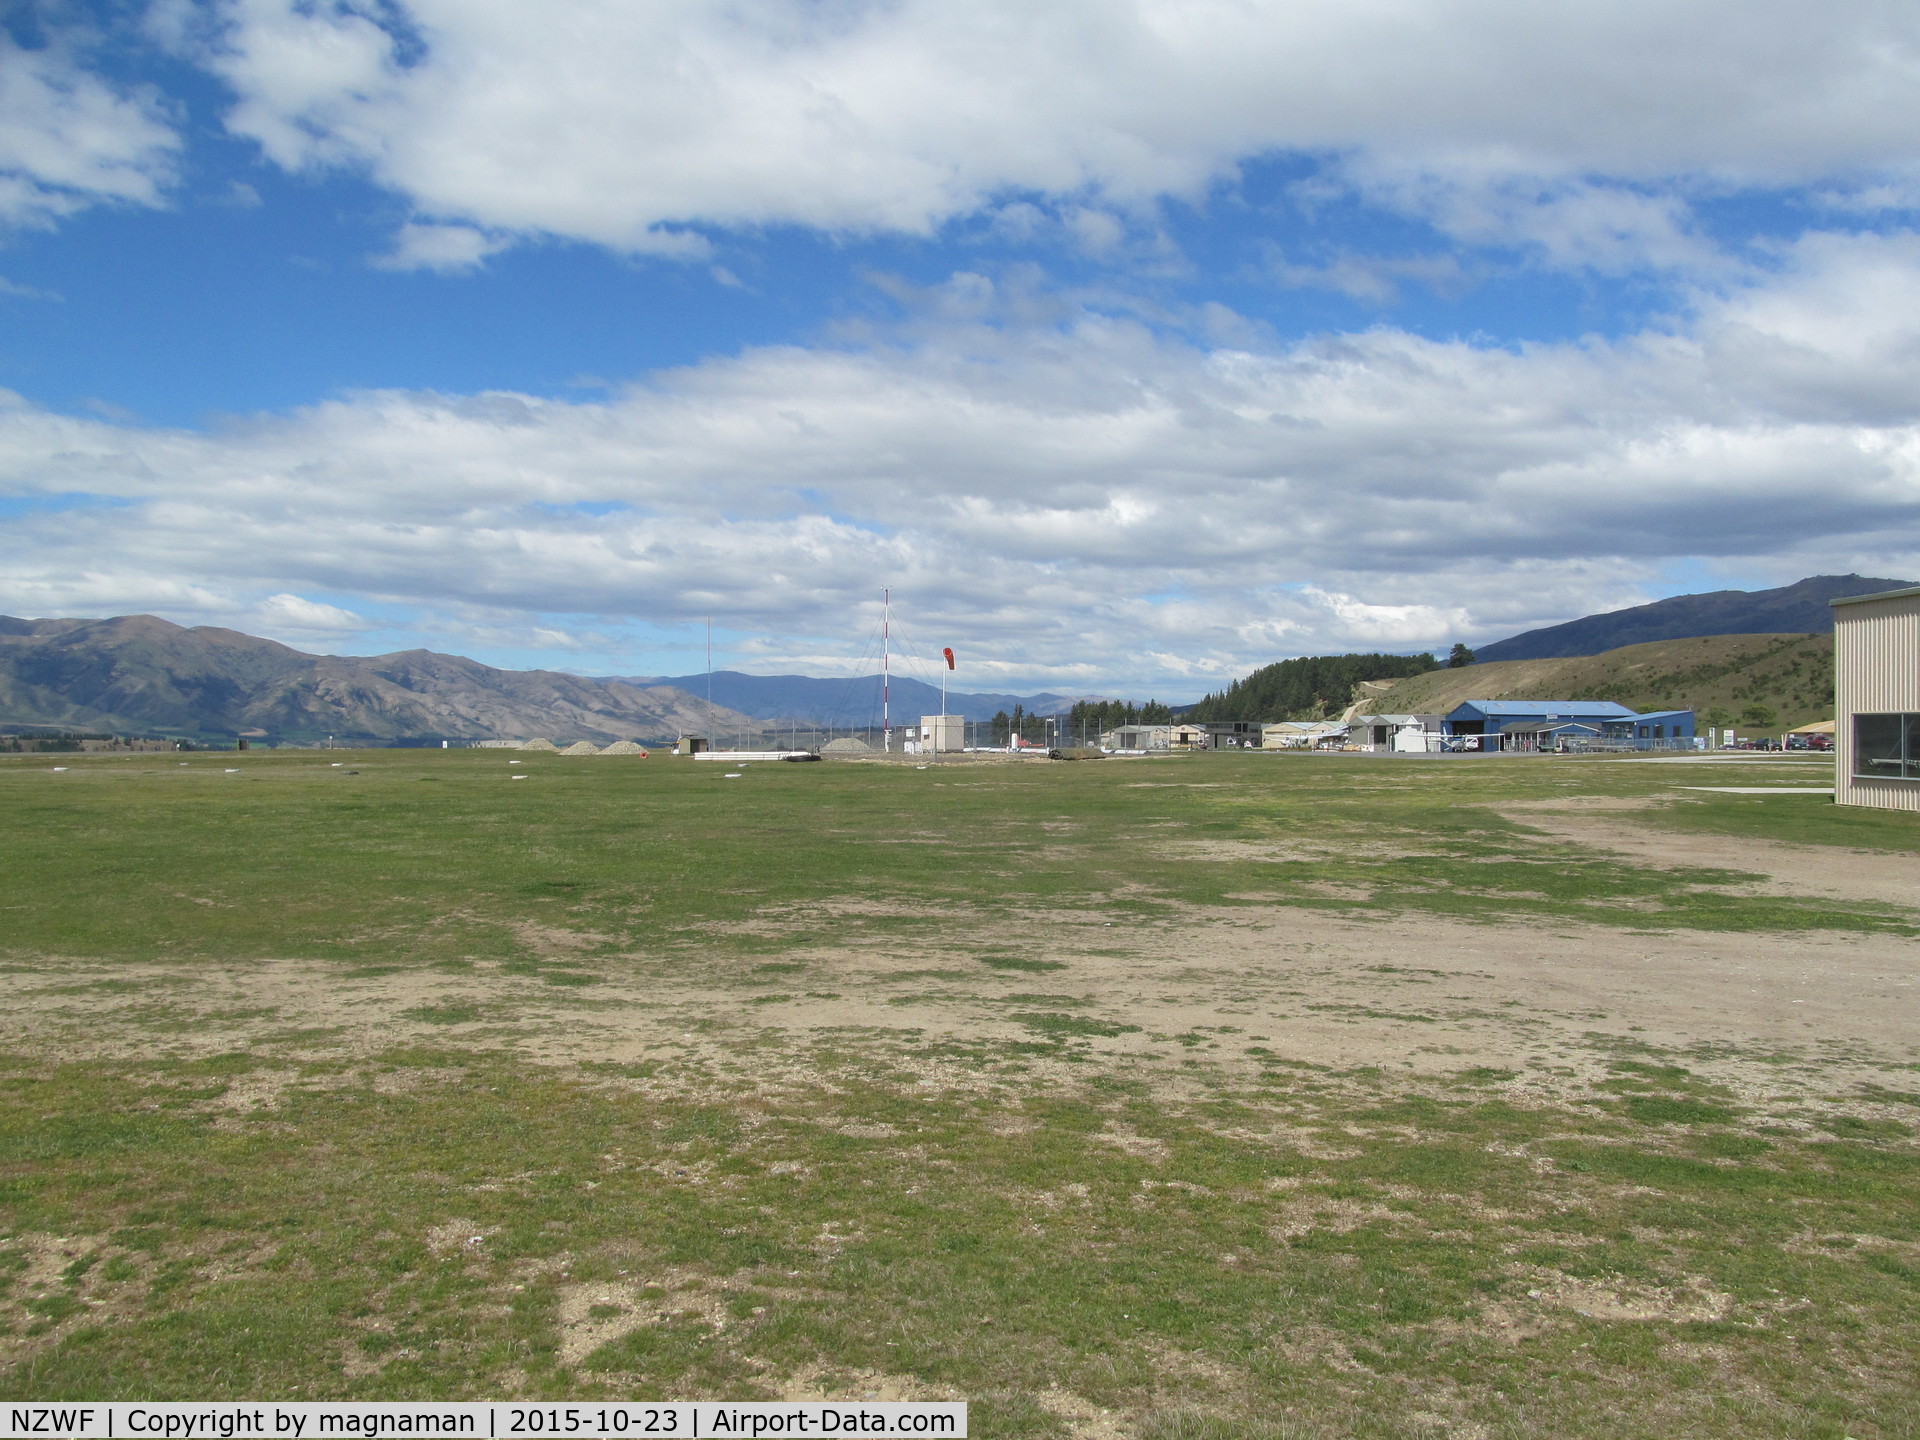 Wanaka Airport, Wanaka New Zealand (NZWF) - View of airfield from the adjacent toy & transport museum